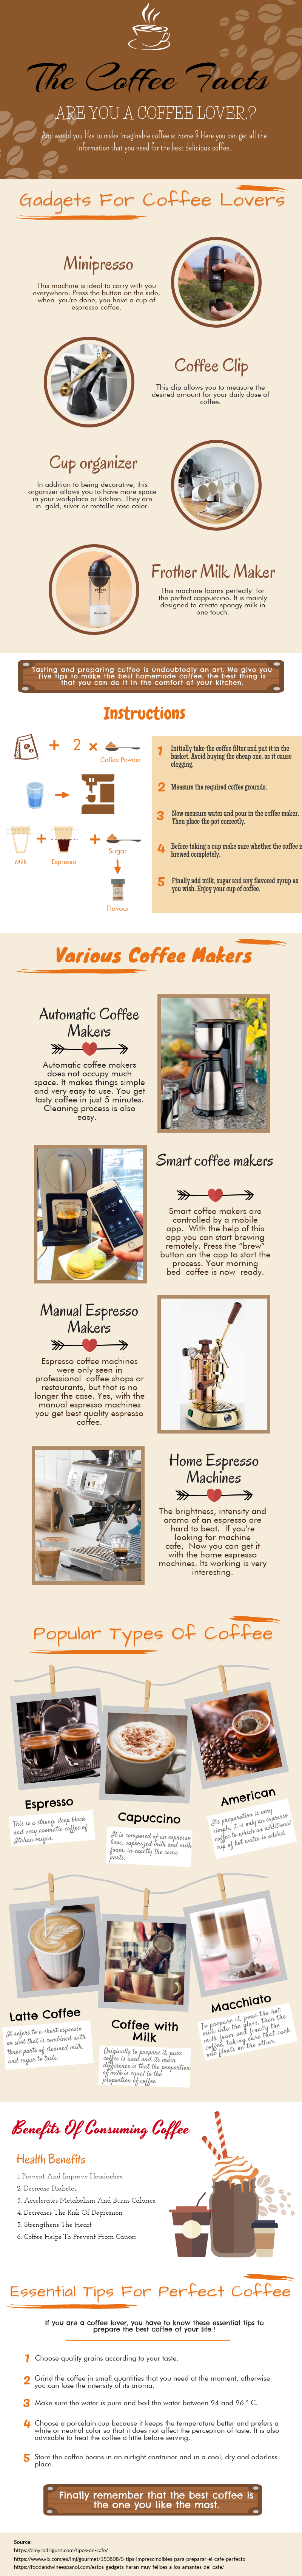 Make the Perfect Cup of Coffee at Home